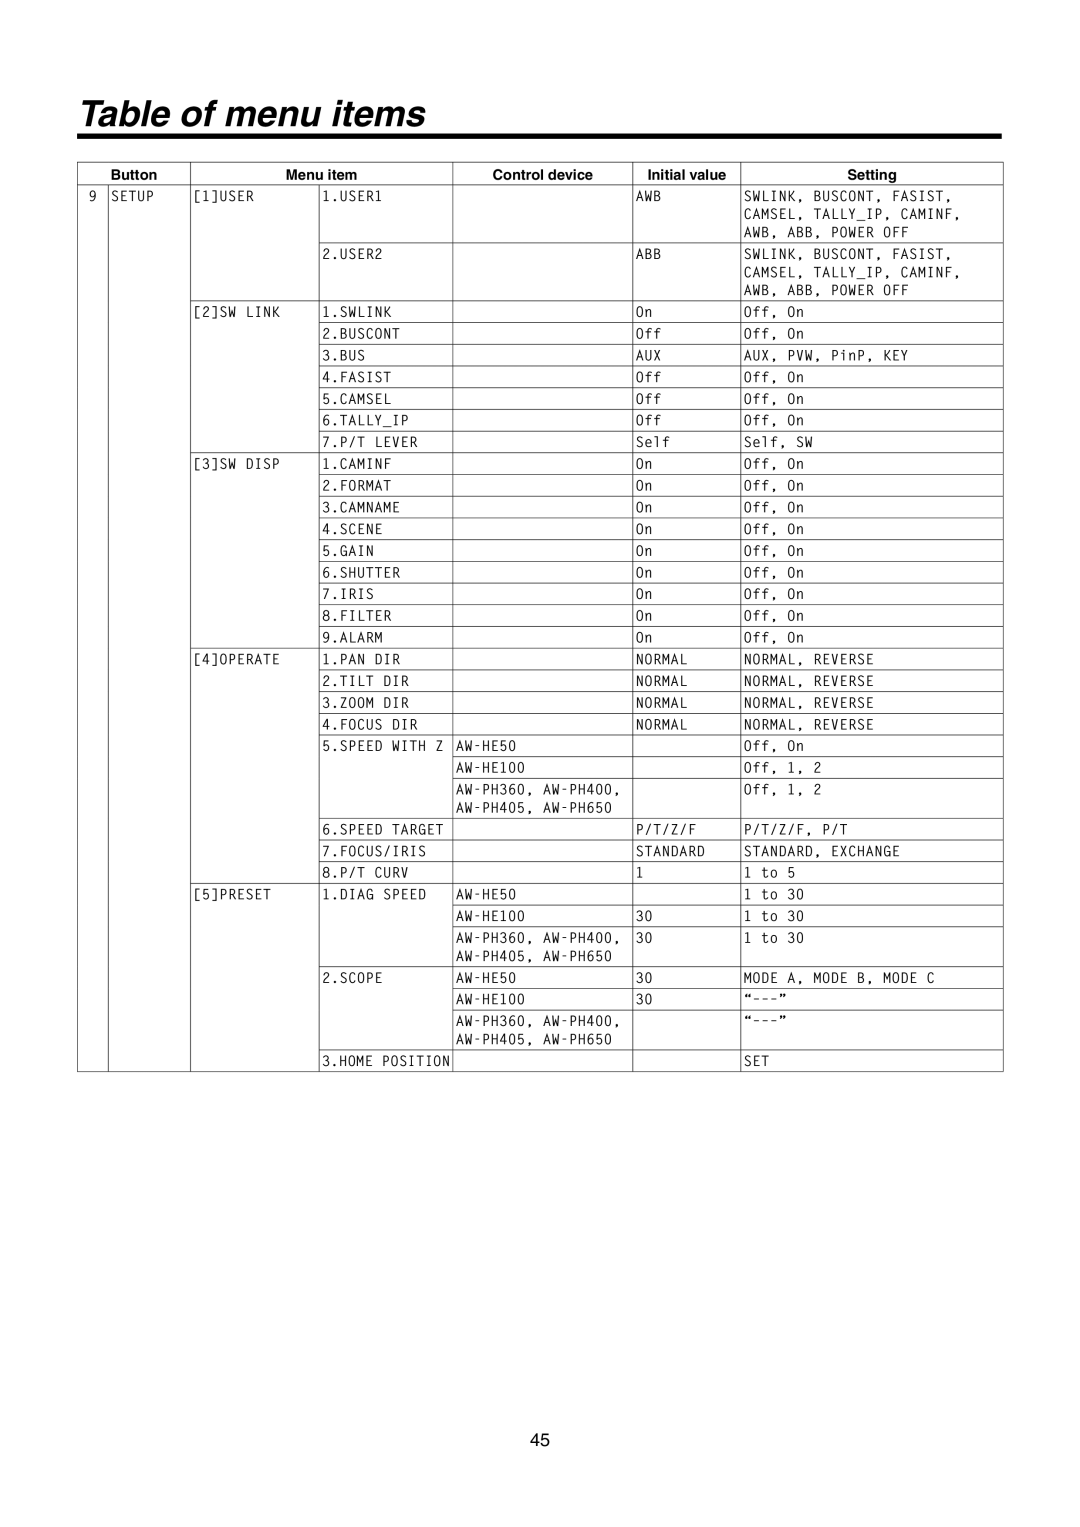 Panasonic AW-RP50N operating instructions Table of menu items, Button, Menu item, Control device, Initial value, Setting 